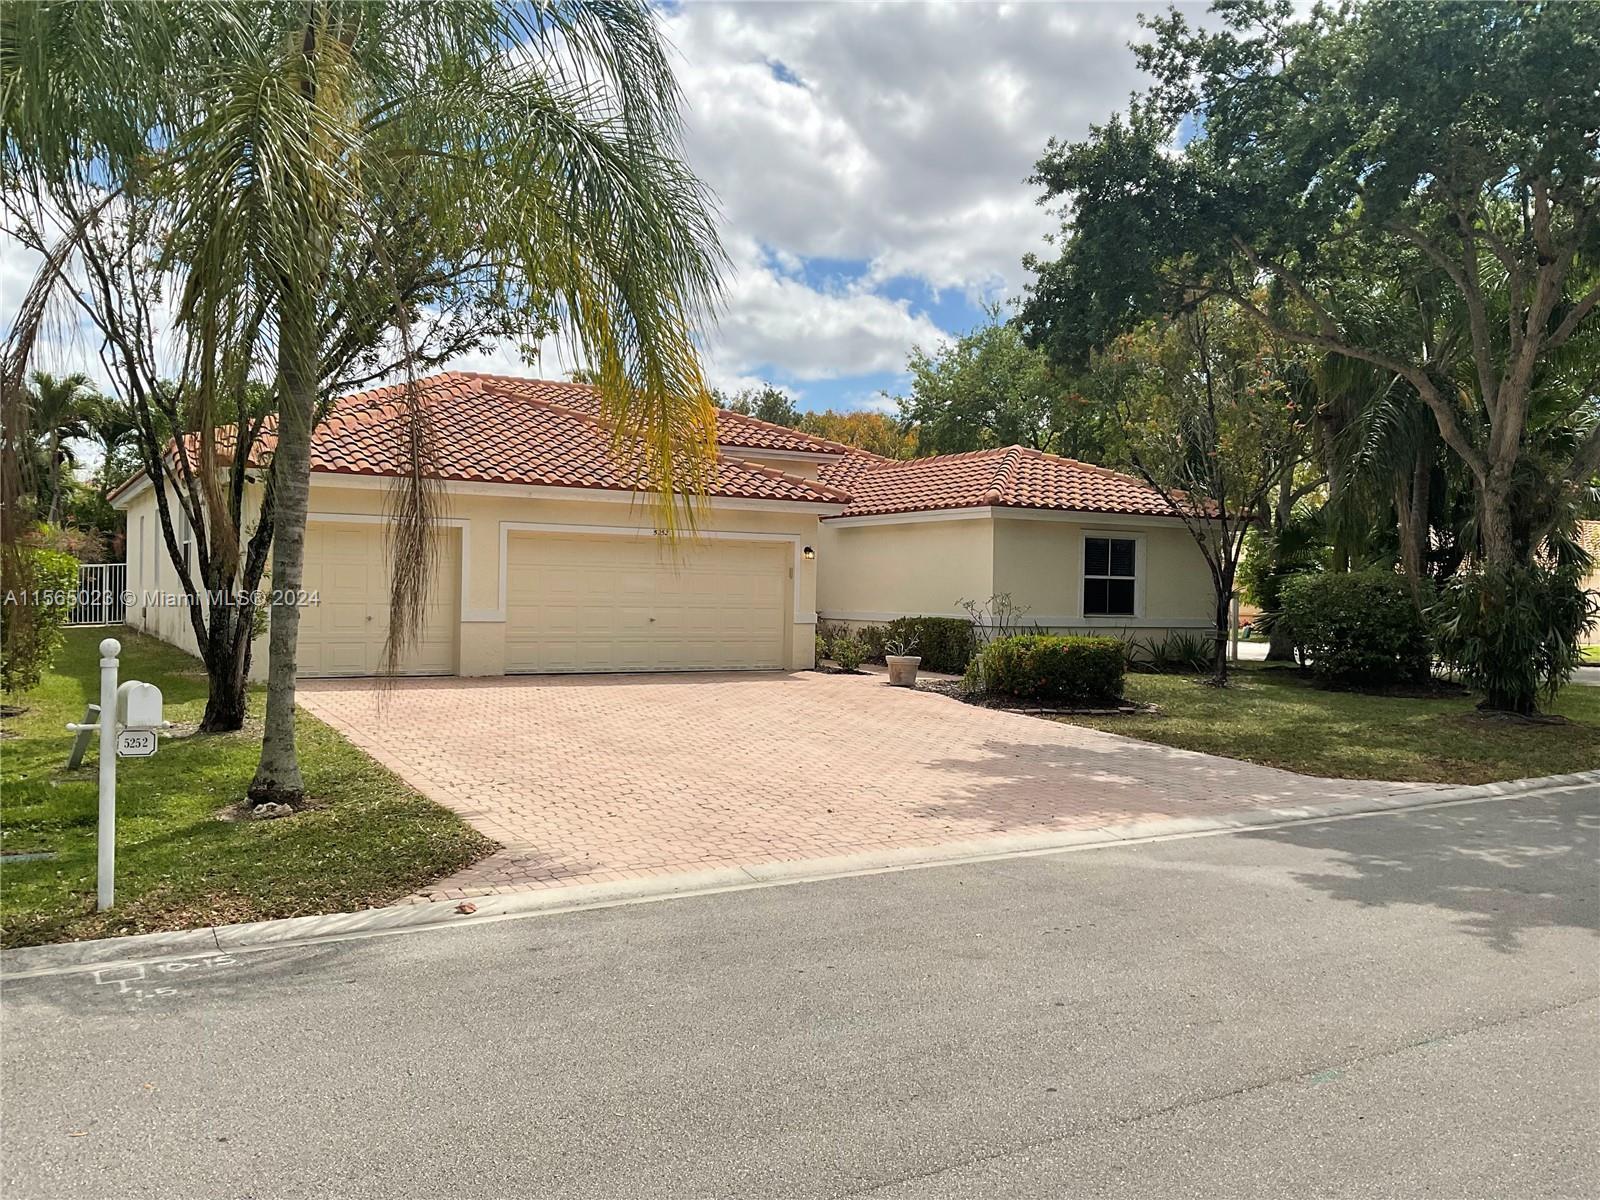 Photo of 5252 NW 51st St in Coconut Creek, FL